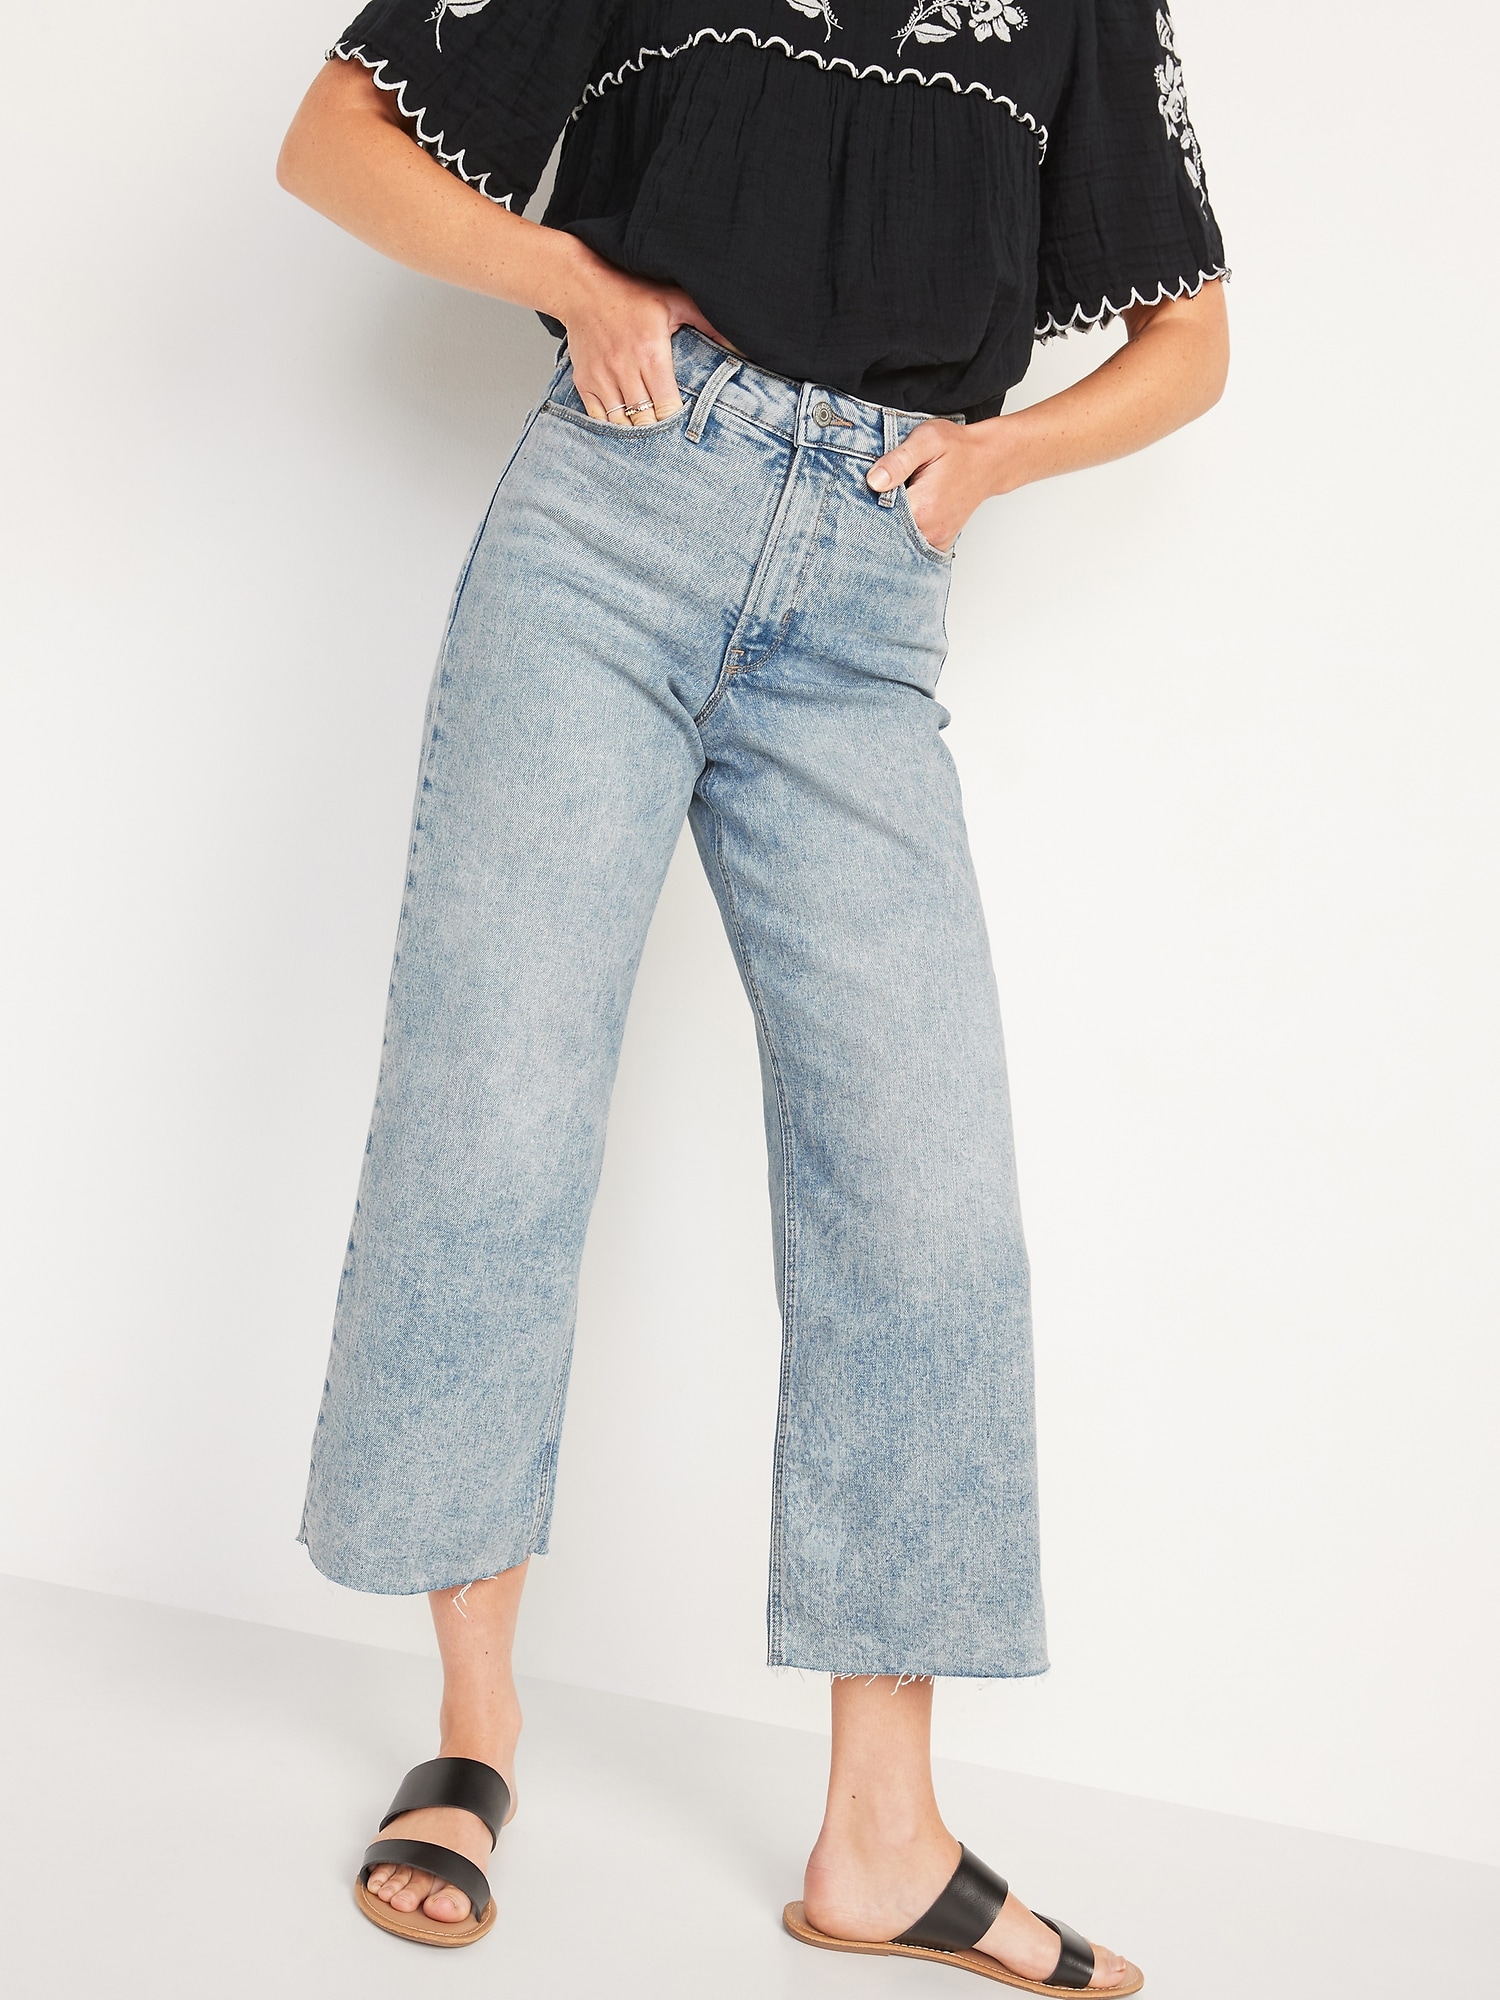 Extra High-Waisted Wide-Leg Raw-Hem Jeans for Women